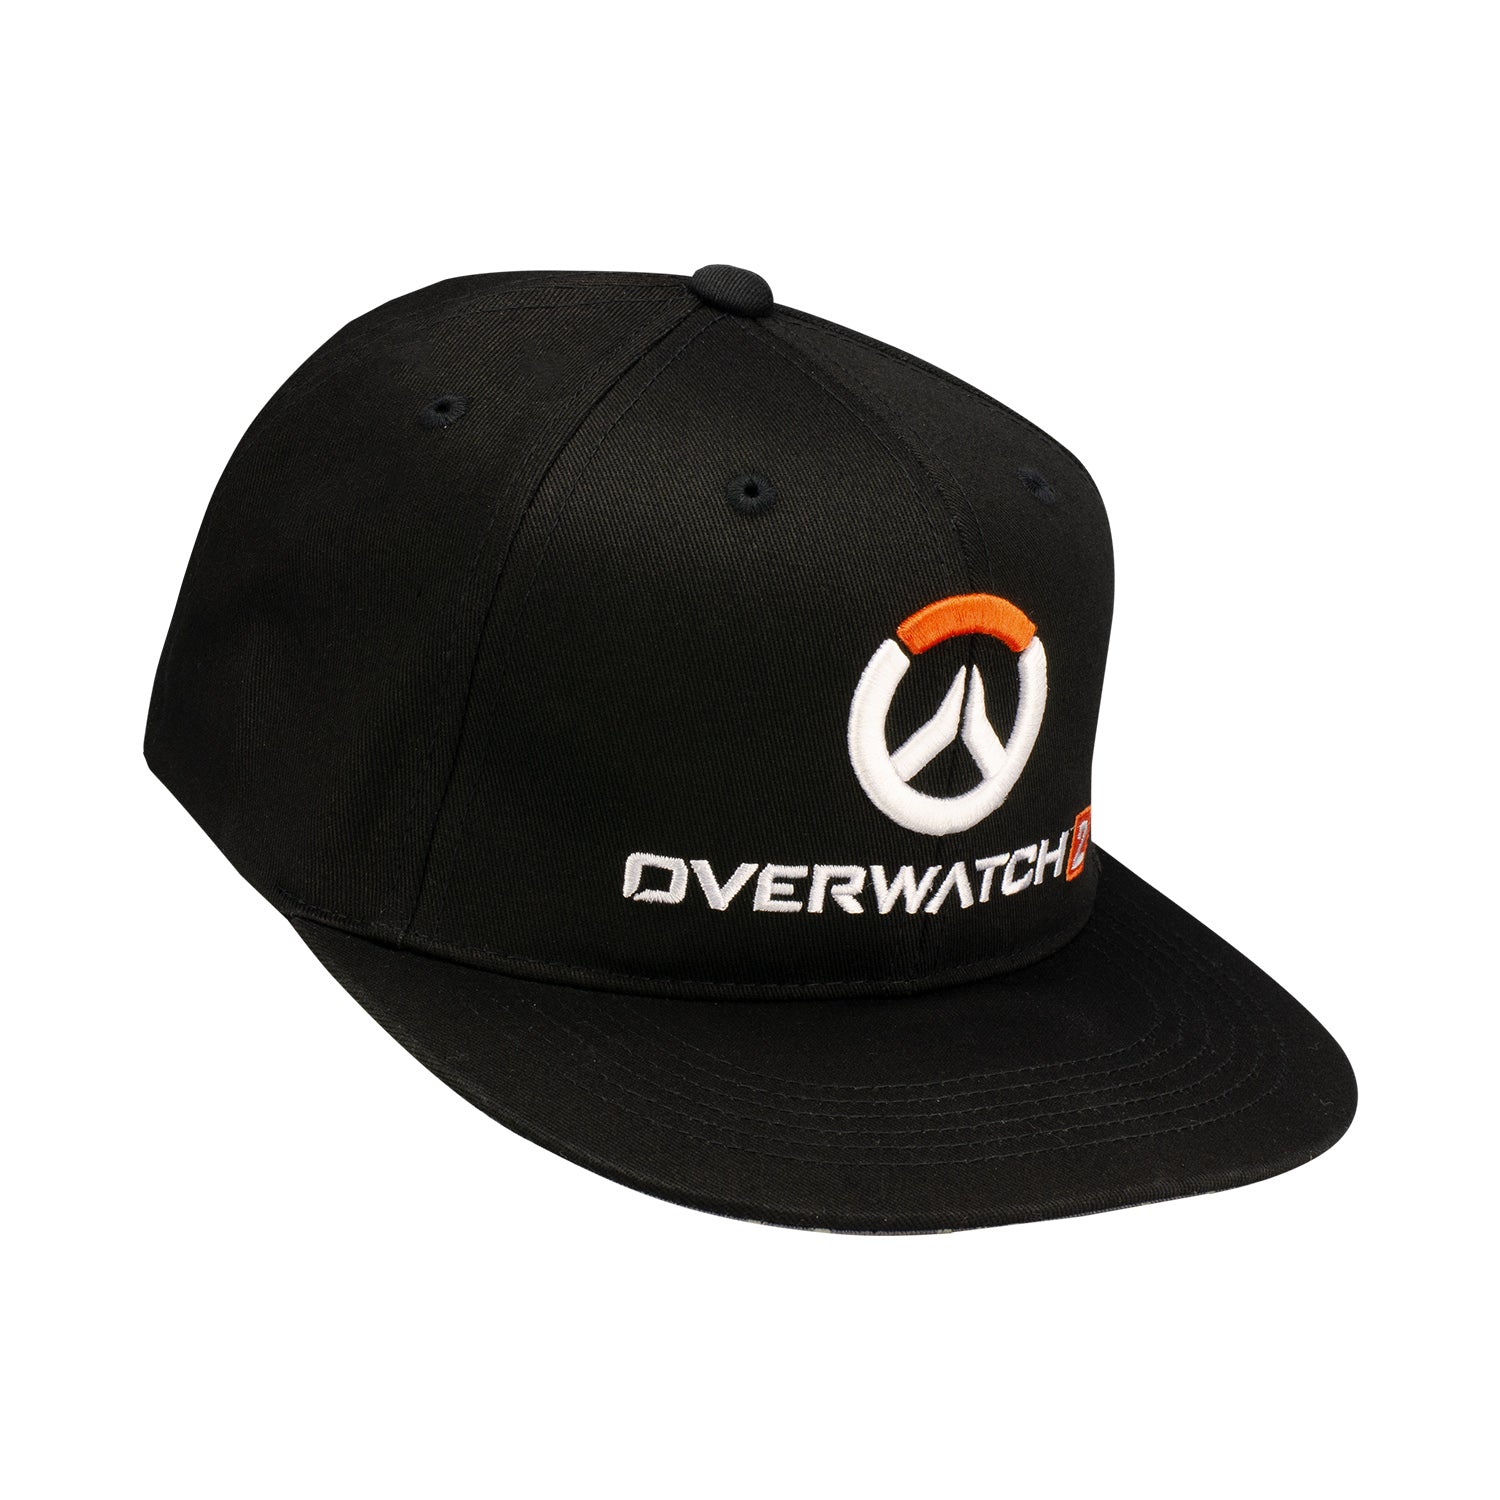 Overwatch 2 Black Flatbill Snapback Hat - Right Side View with Overwatch Logo on the Front